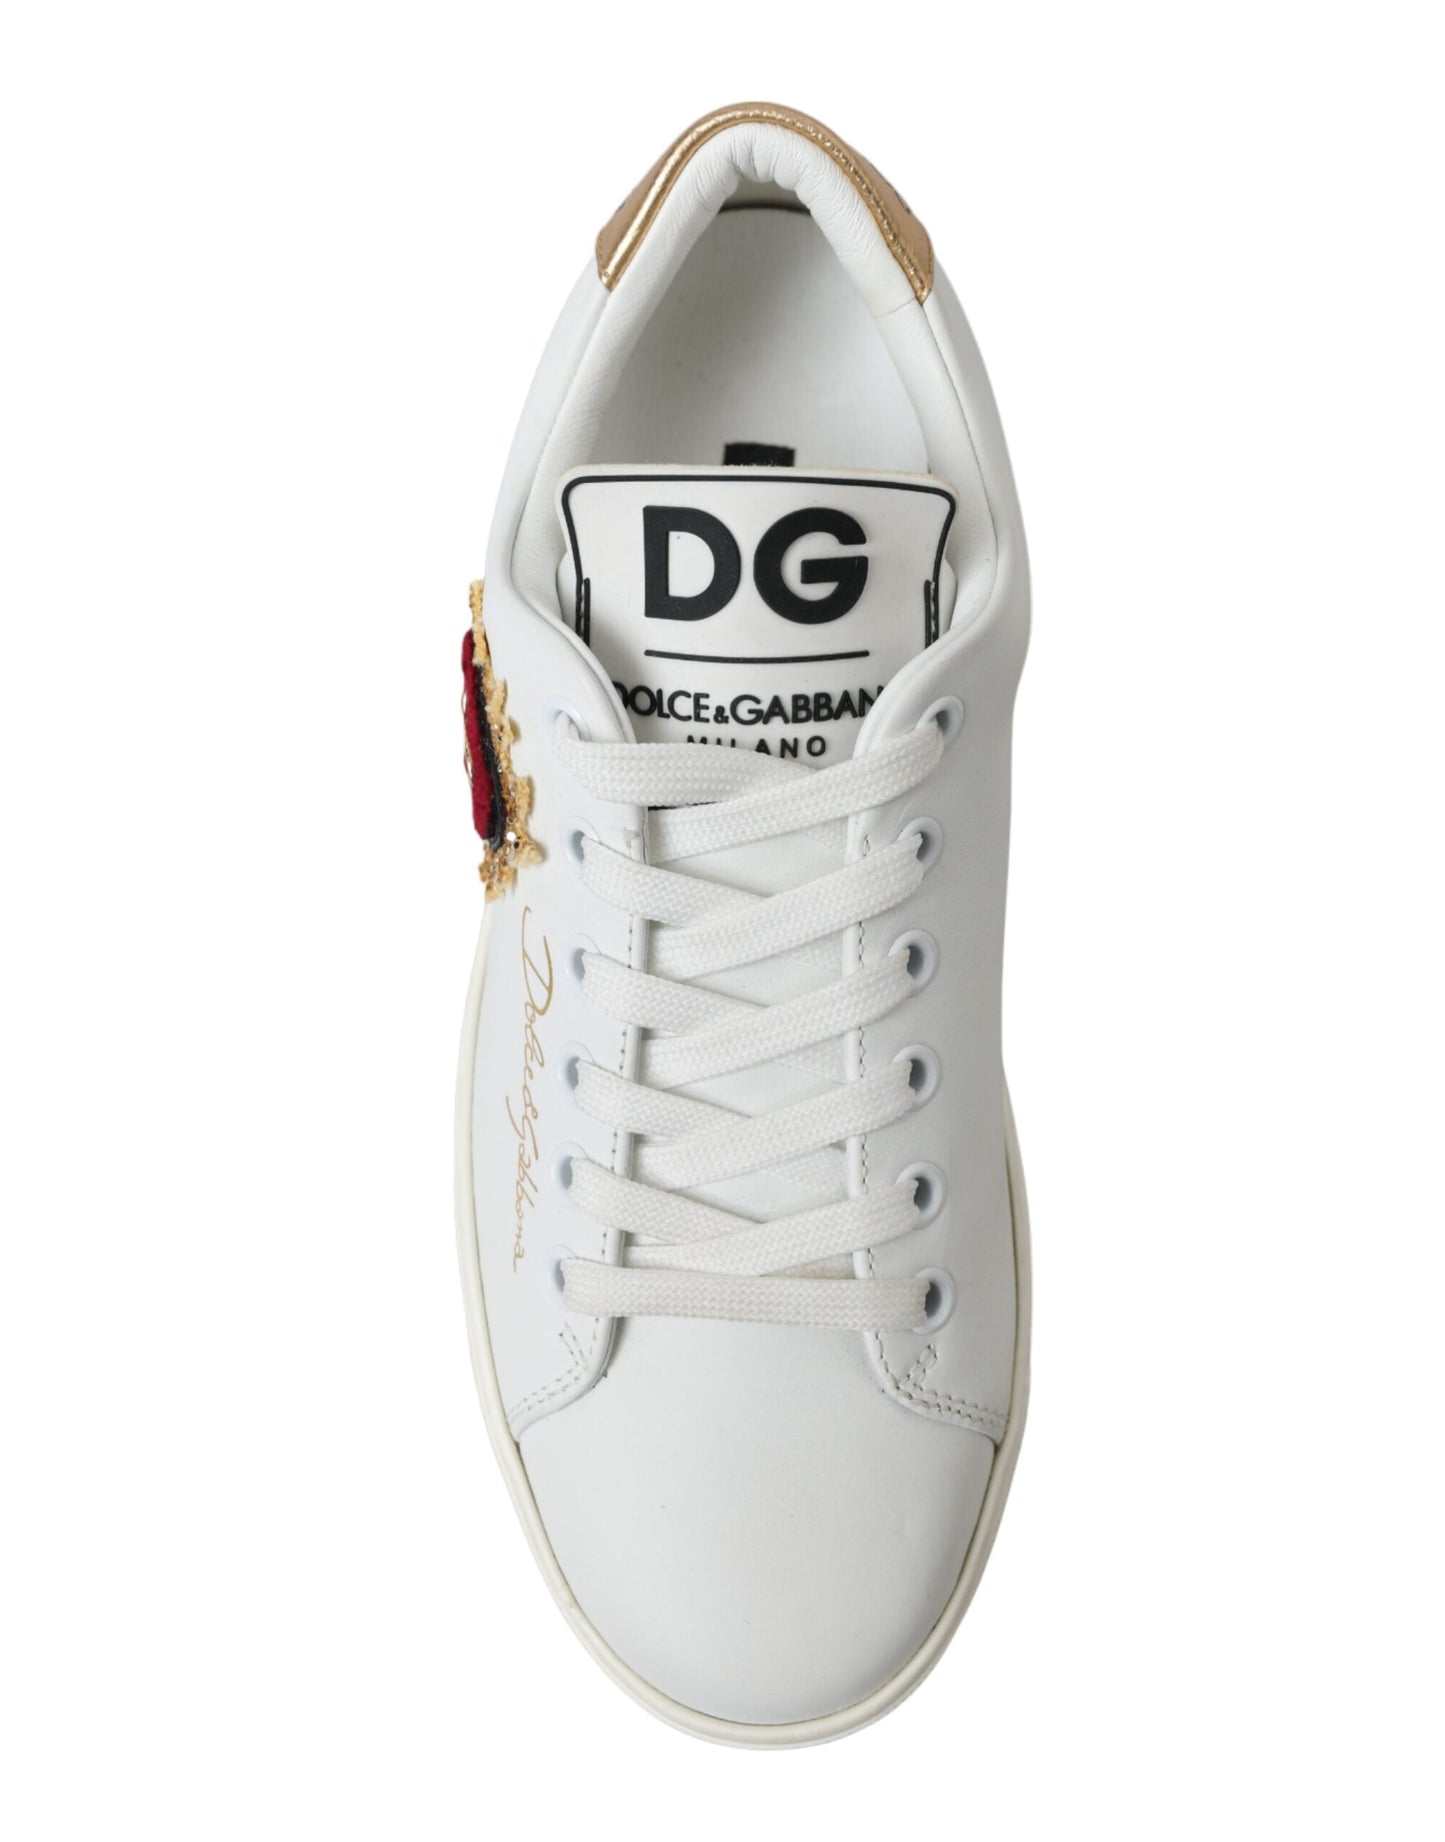 Dolce & Gabbana Elegant White Leather Sneakers with Gold Studs